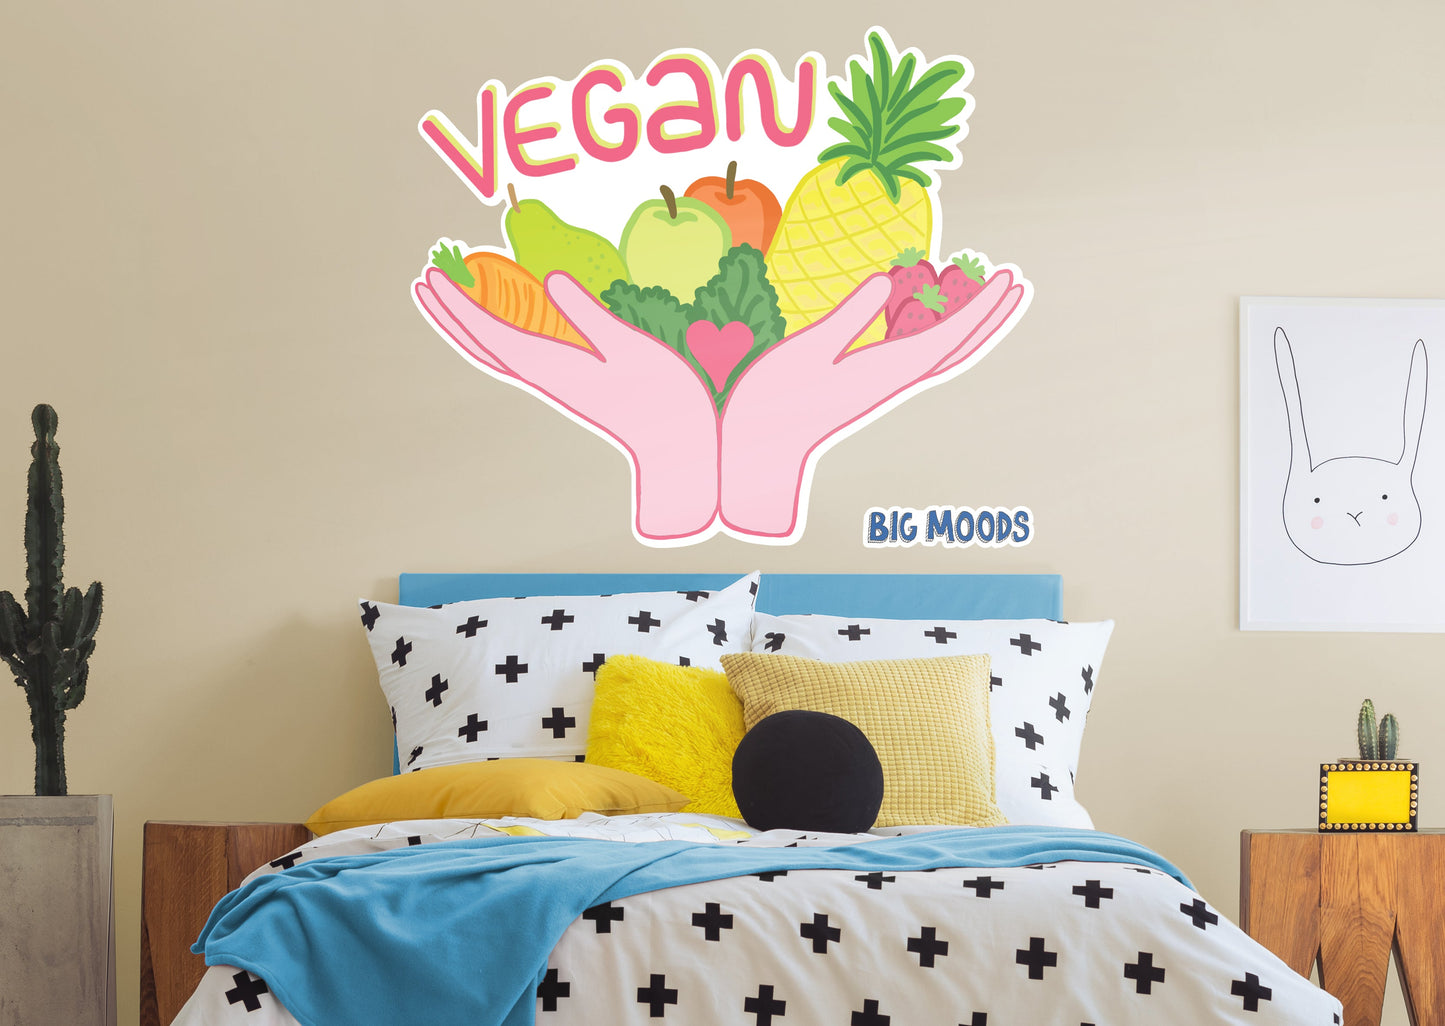 Vegan Fruits & Veggies Hands        - Officially Licensed Big Moods Removable     Adhesive Decal